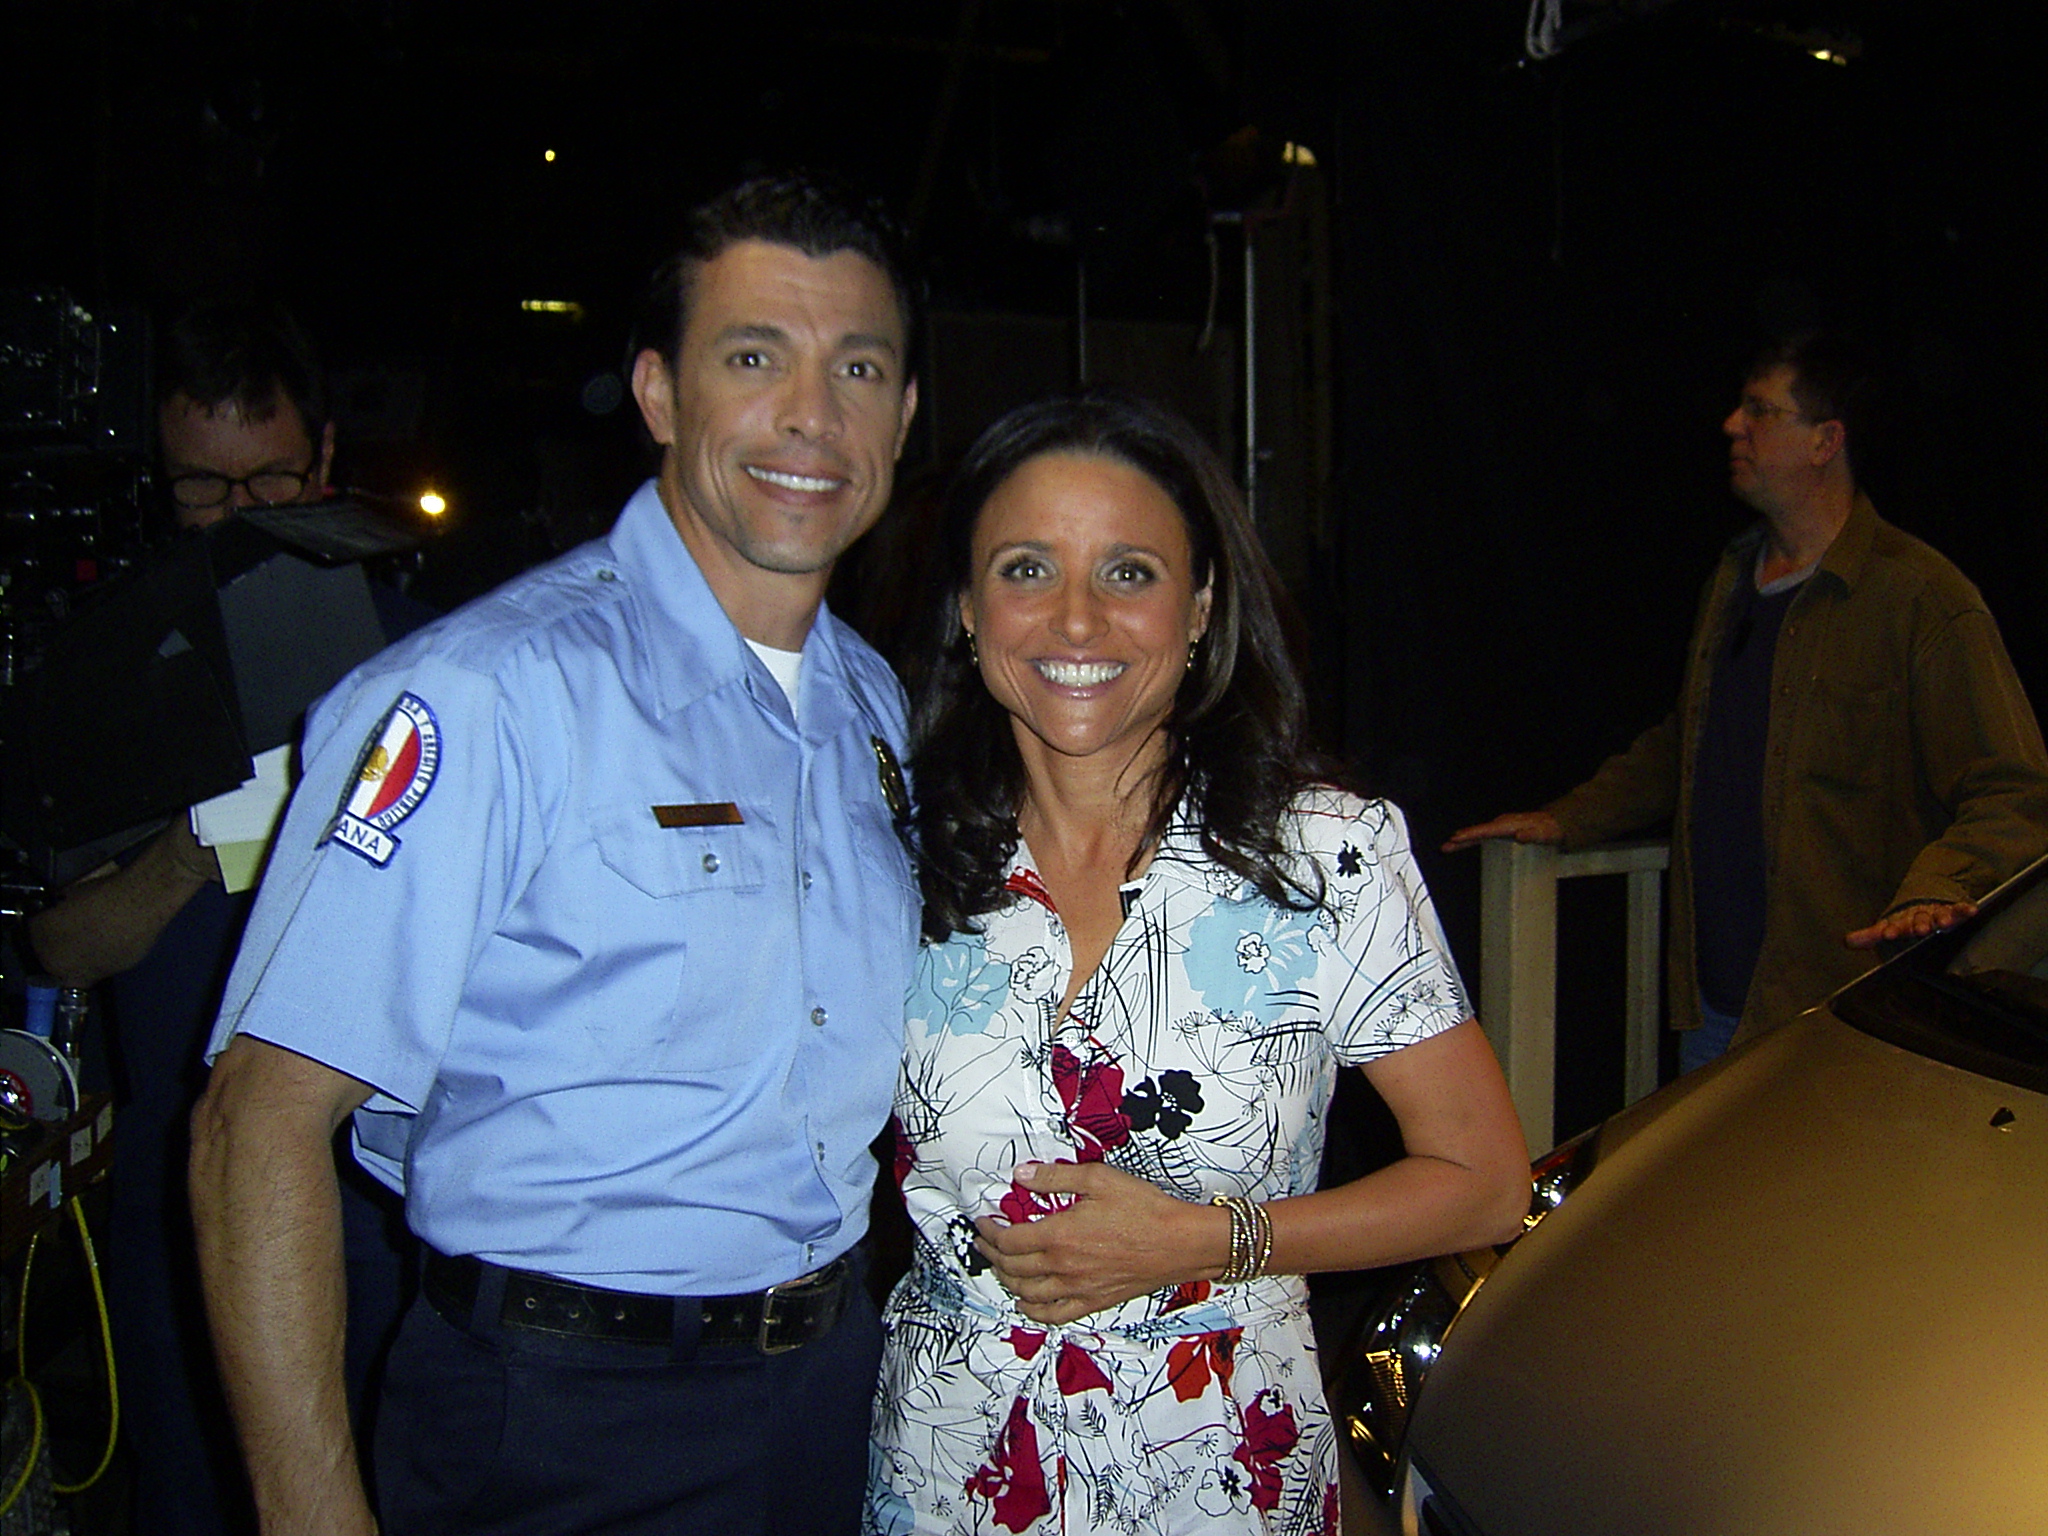 Al Coronel and Julia Louis-Dreyfus on the set of New Adventures of Old Christine